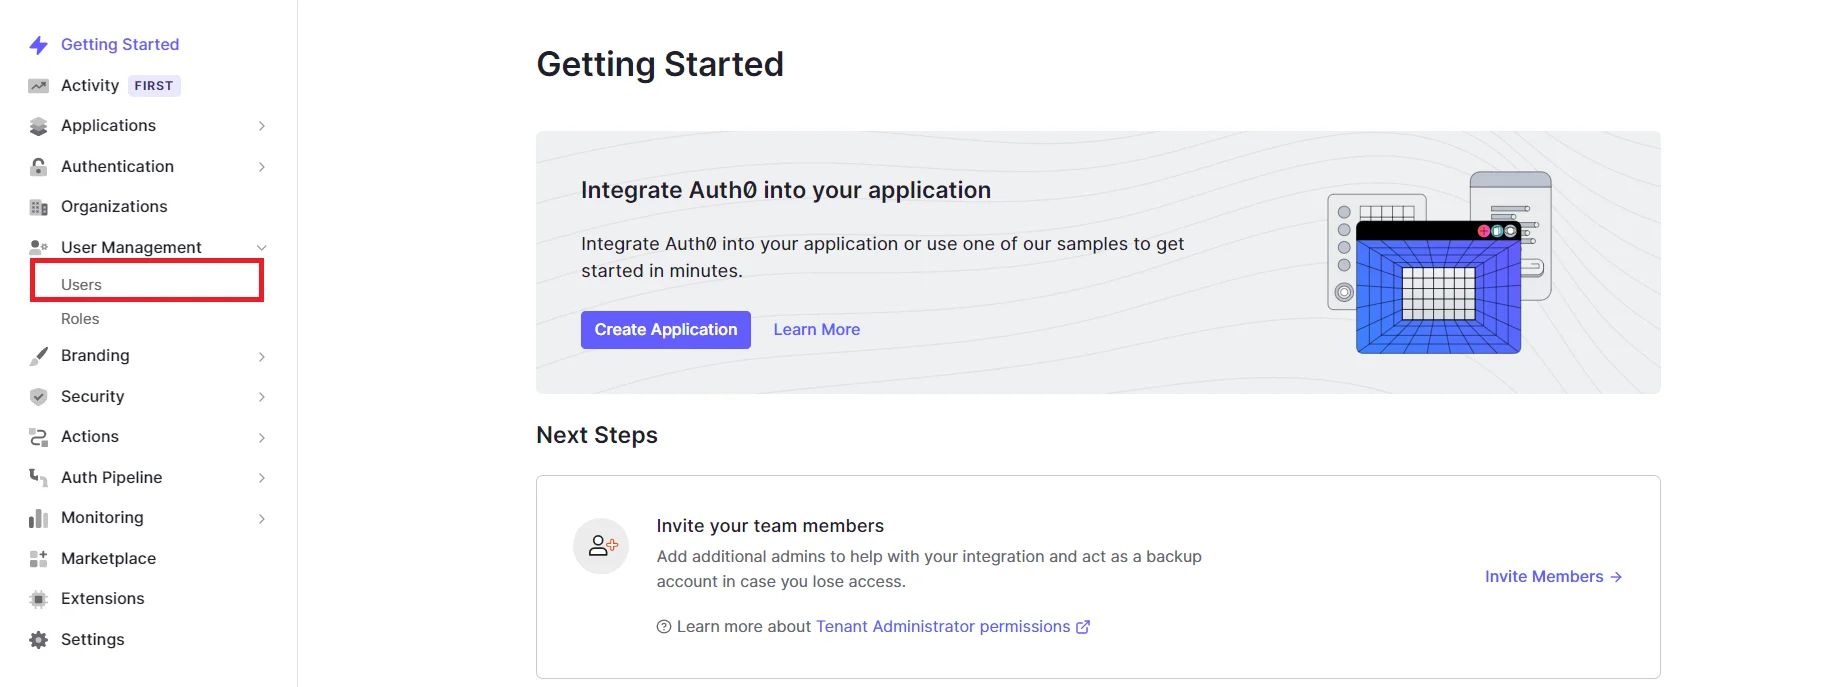 nopCommerce OAuth Single Sign-On (SSO) using Auth0 as IDP - go to user